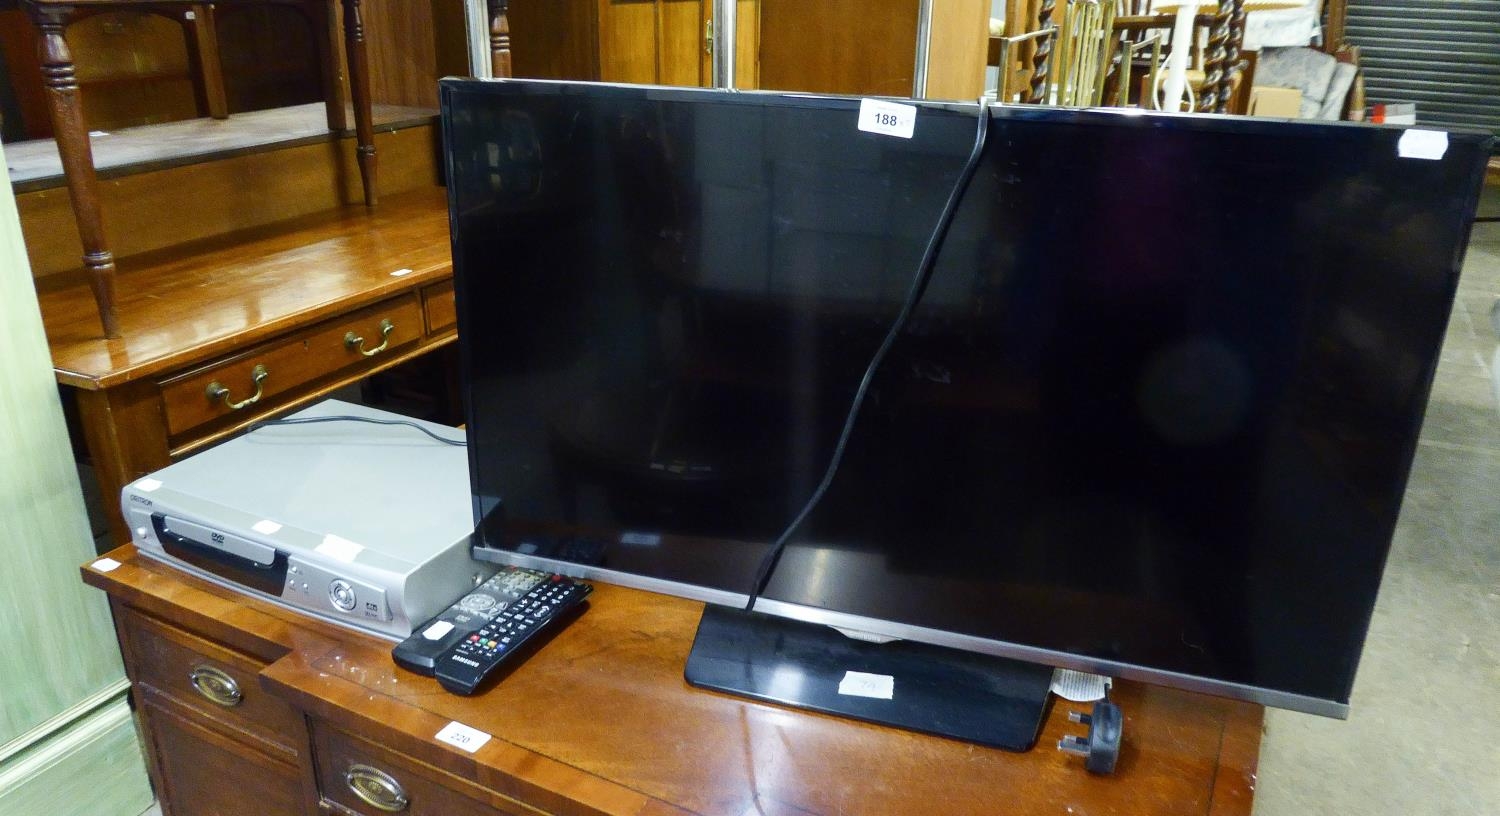 SAMSUNG 32? FLAT SCREEN TELEVISION AND AN ORISTON DVD PLAYER